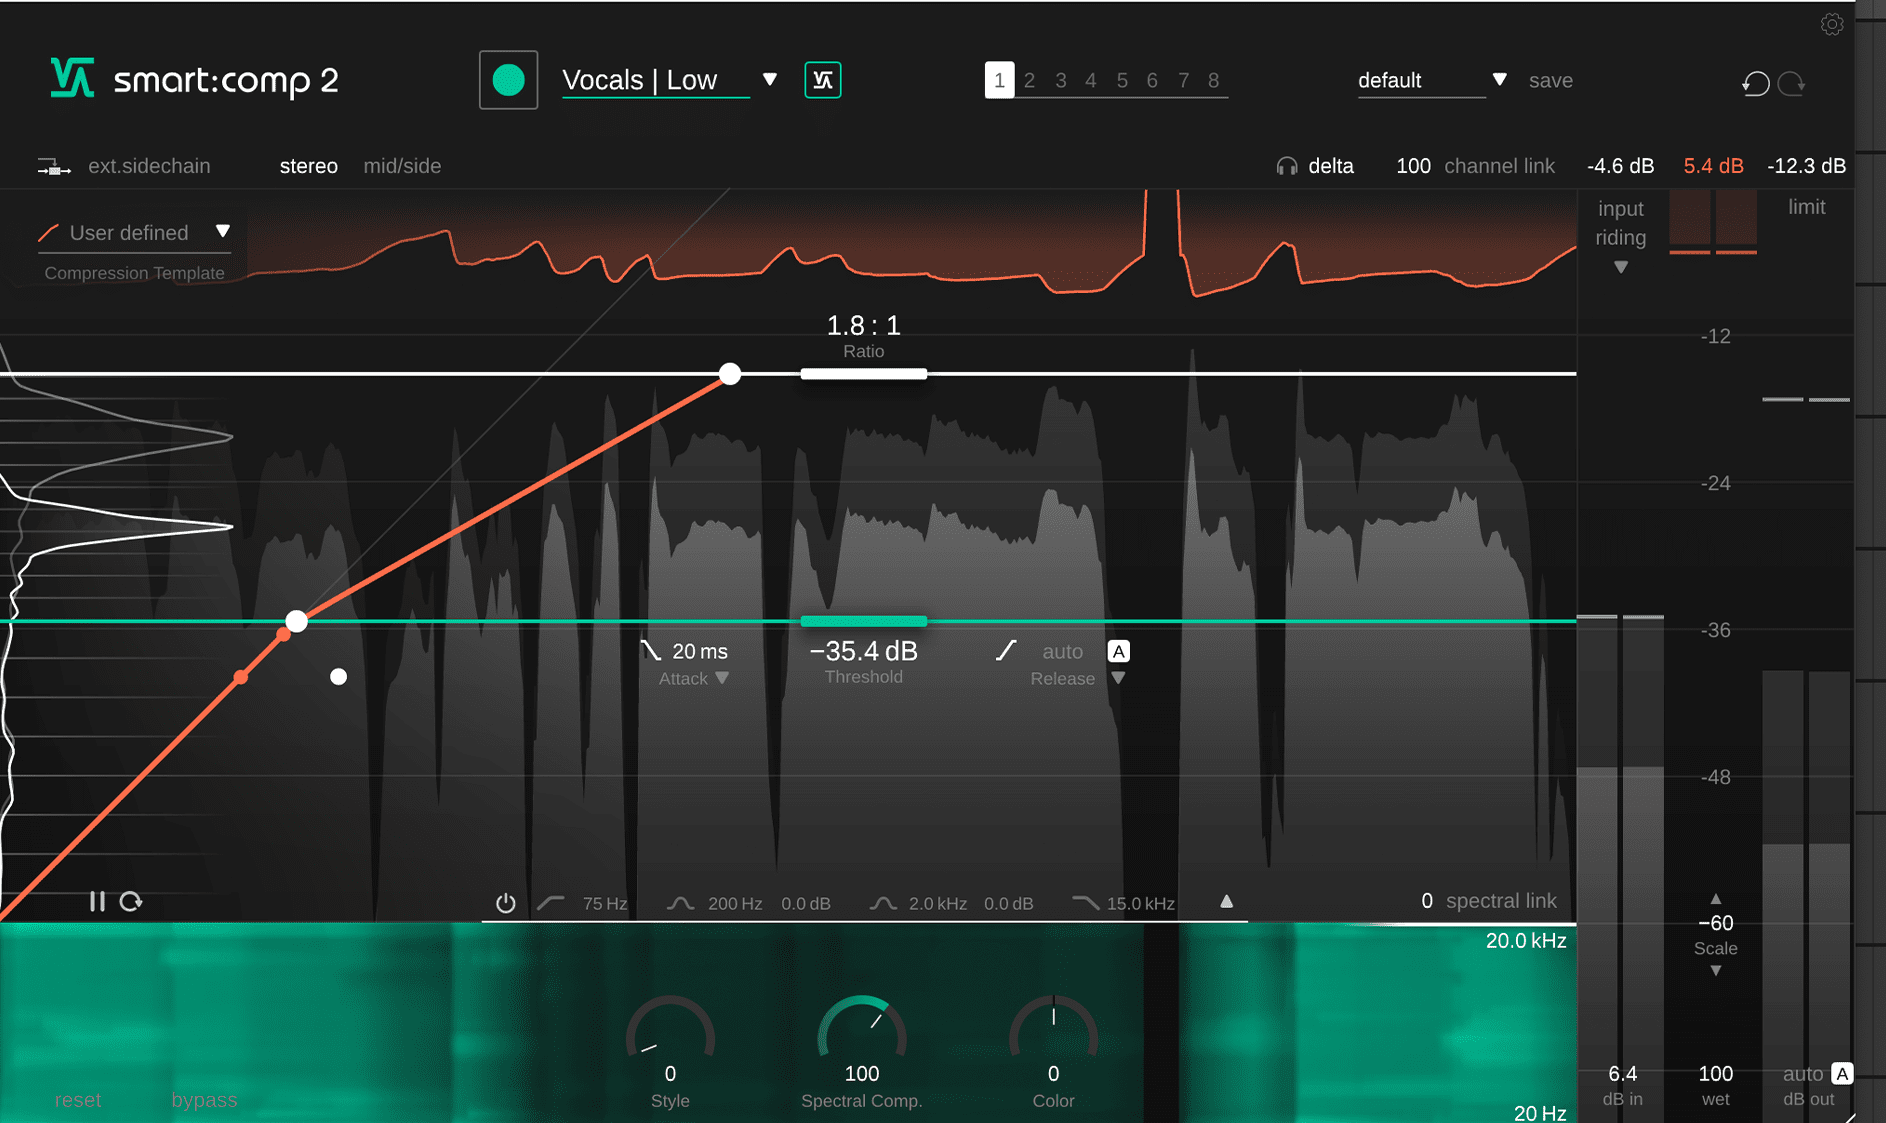 example of an interface of sonible's smart:comp 2 with a chosen vocal low profile